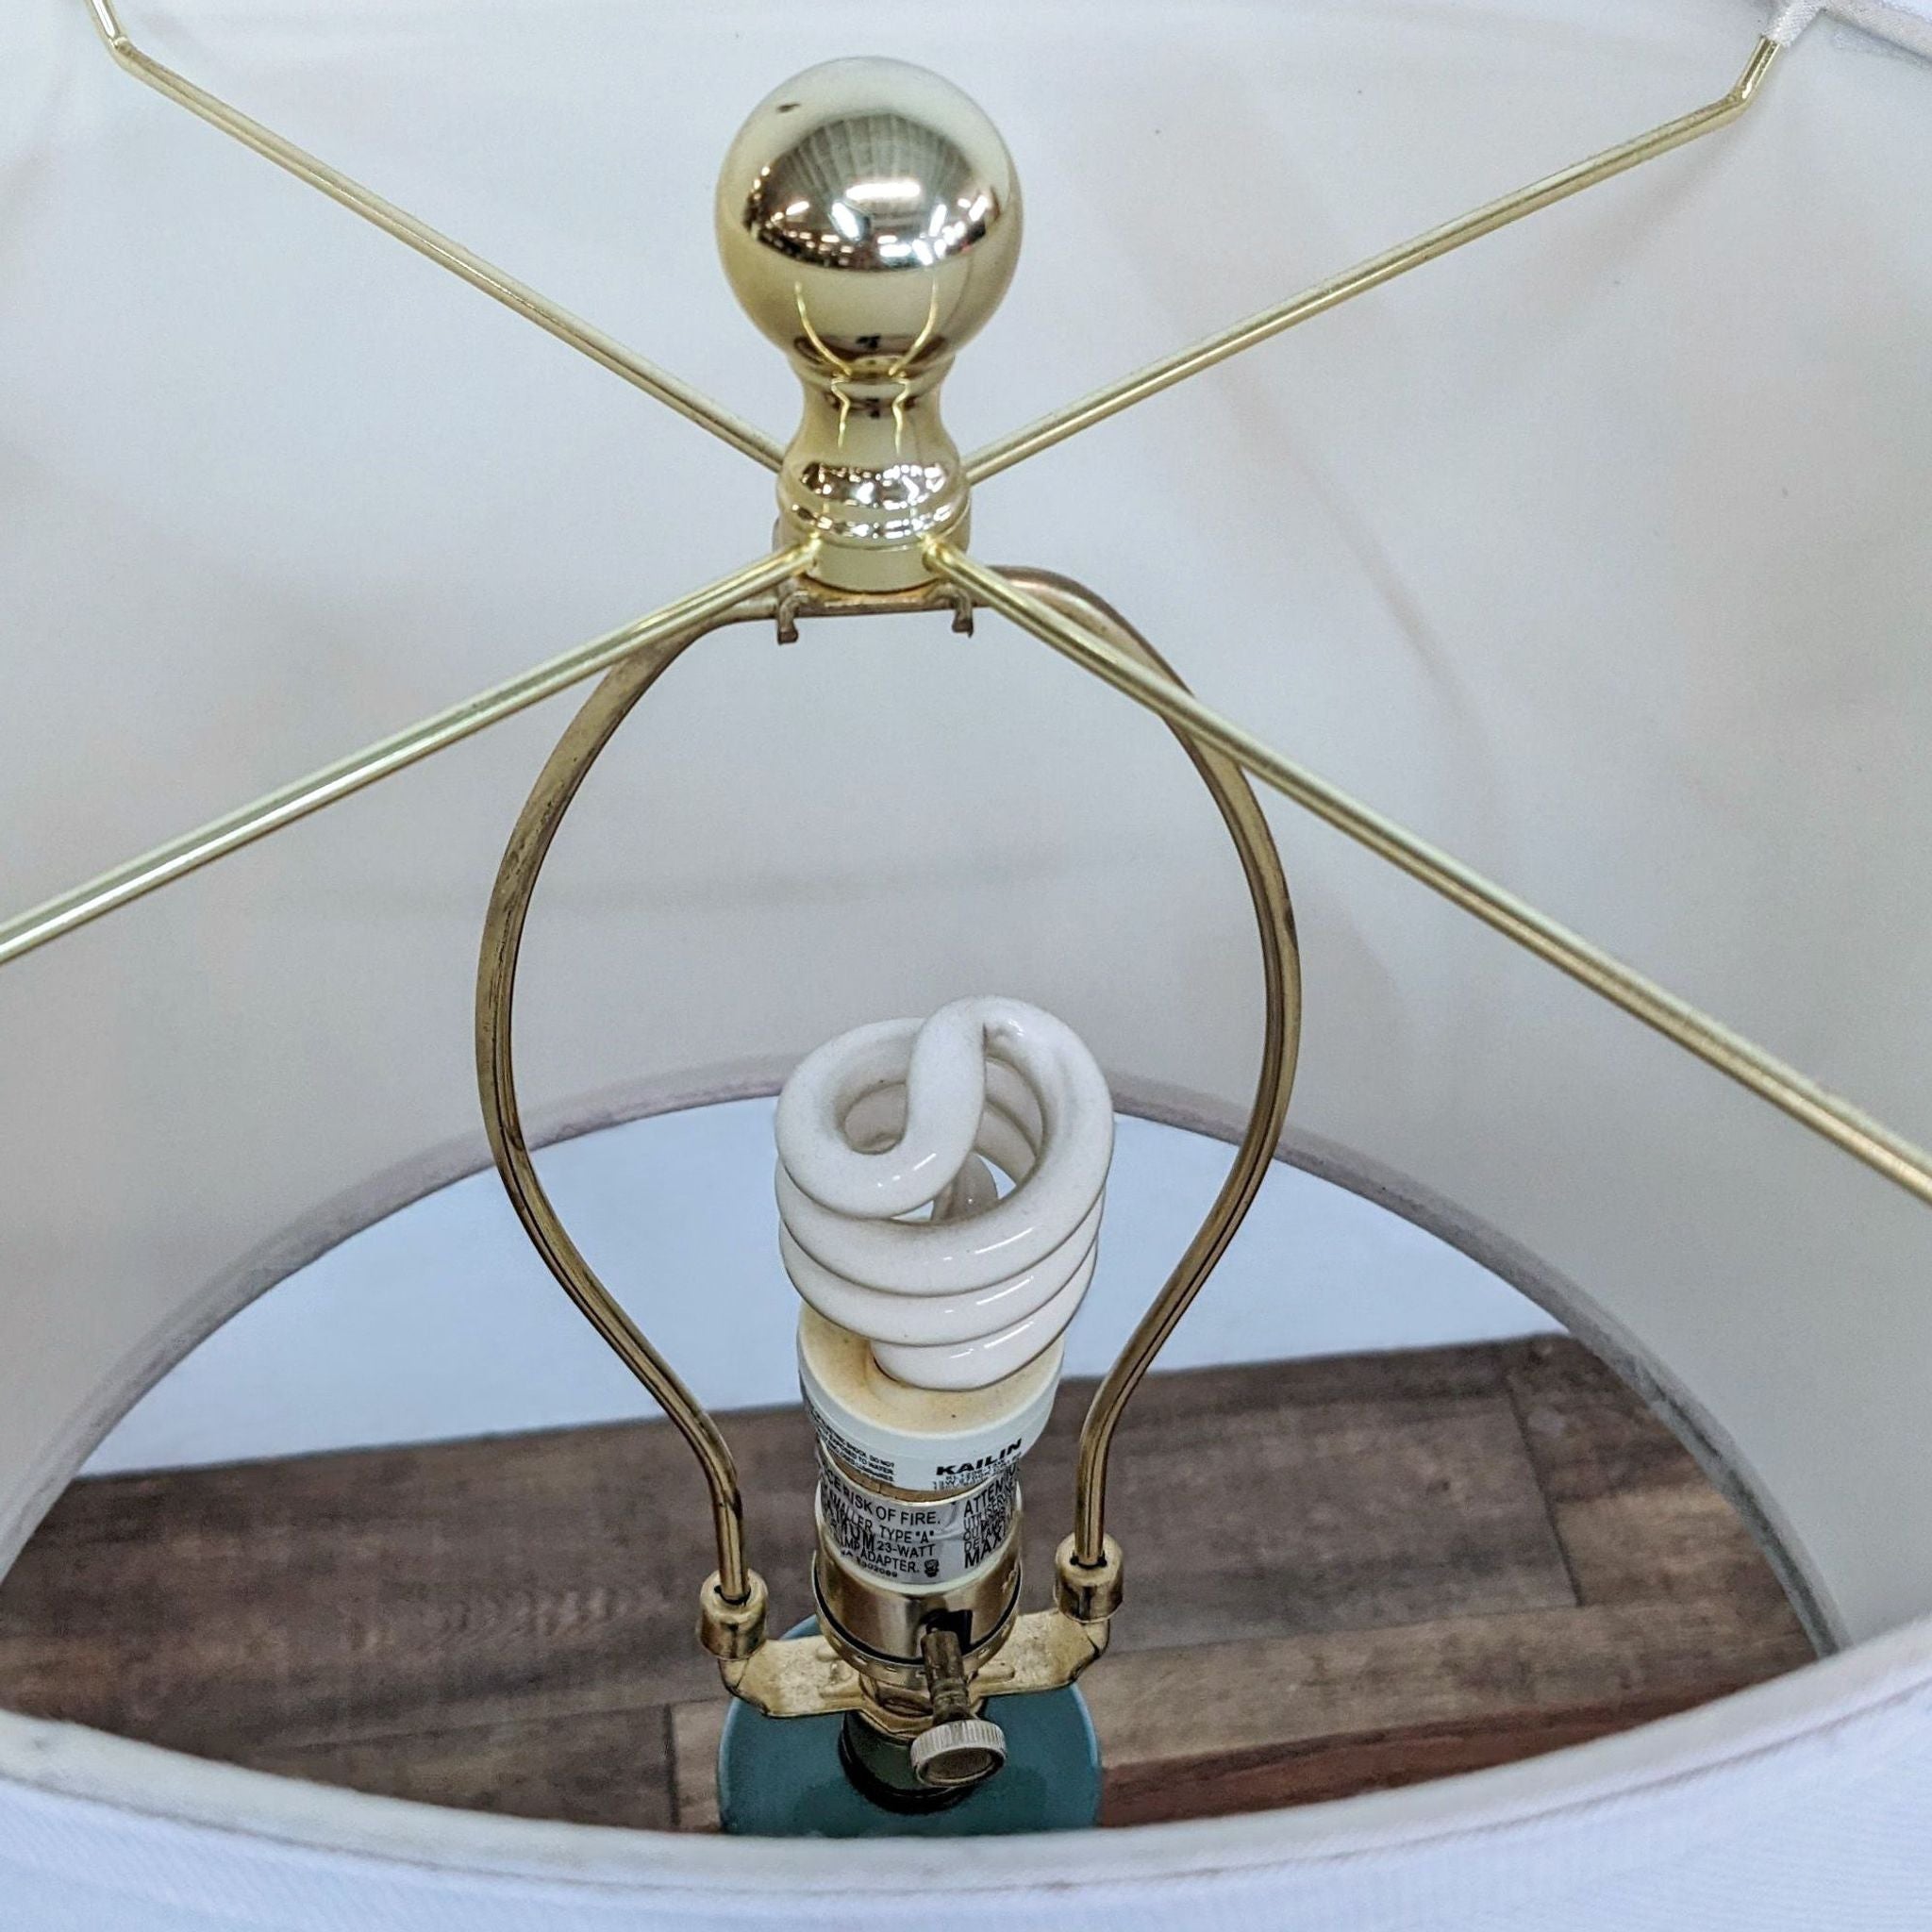 Safavieh branded lighting featuring a close-up of a CFL bulb and brass lamp structure with a spherical finial.